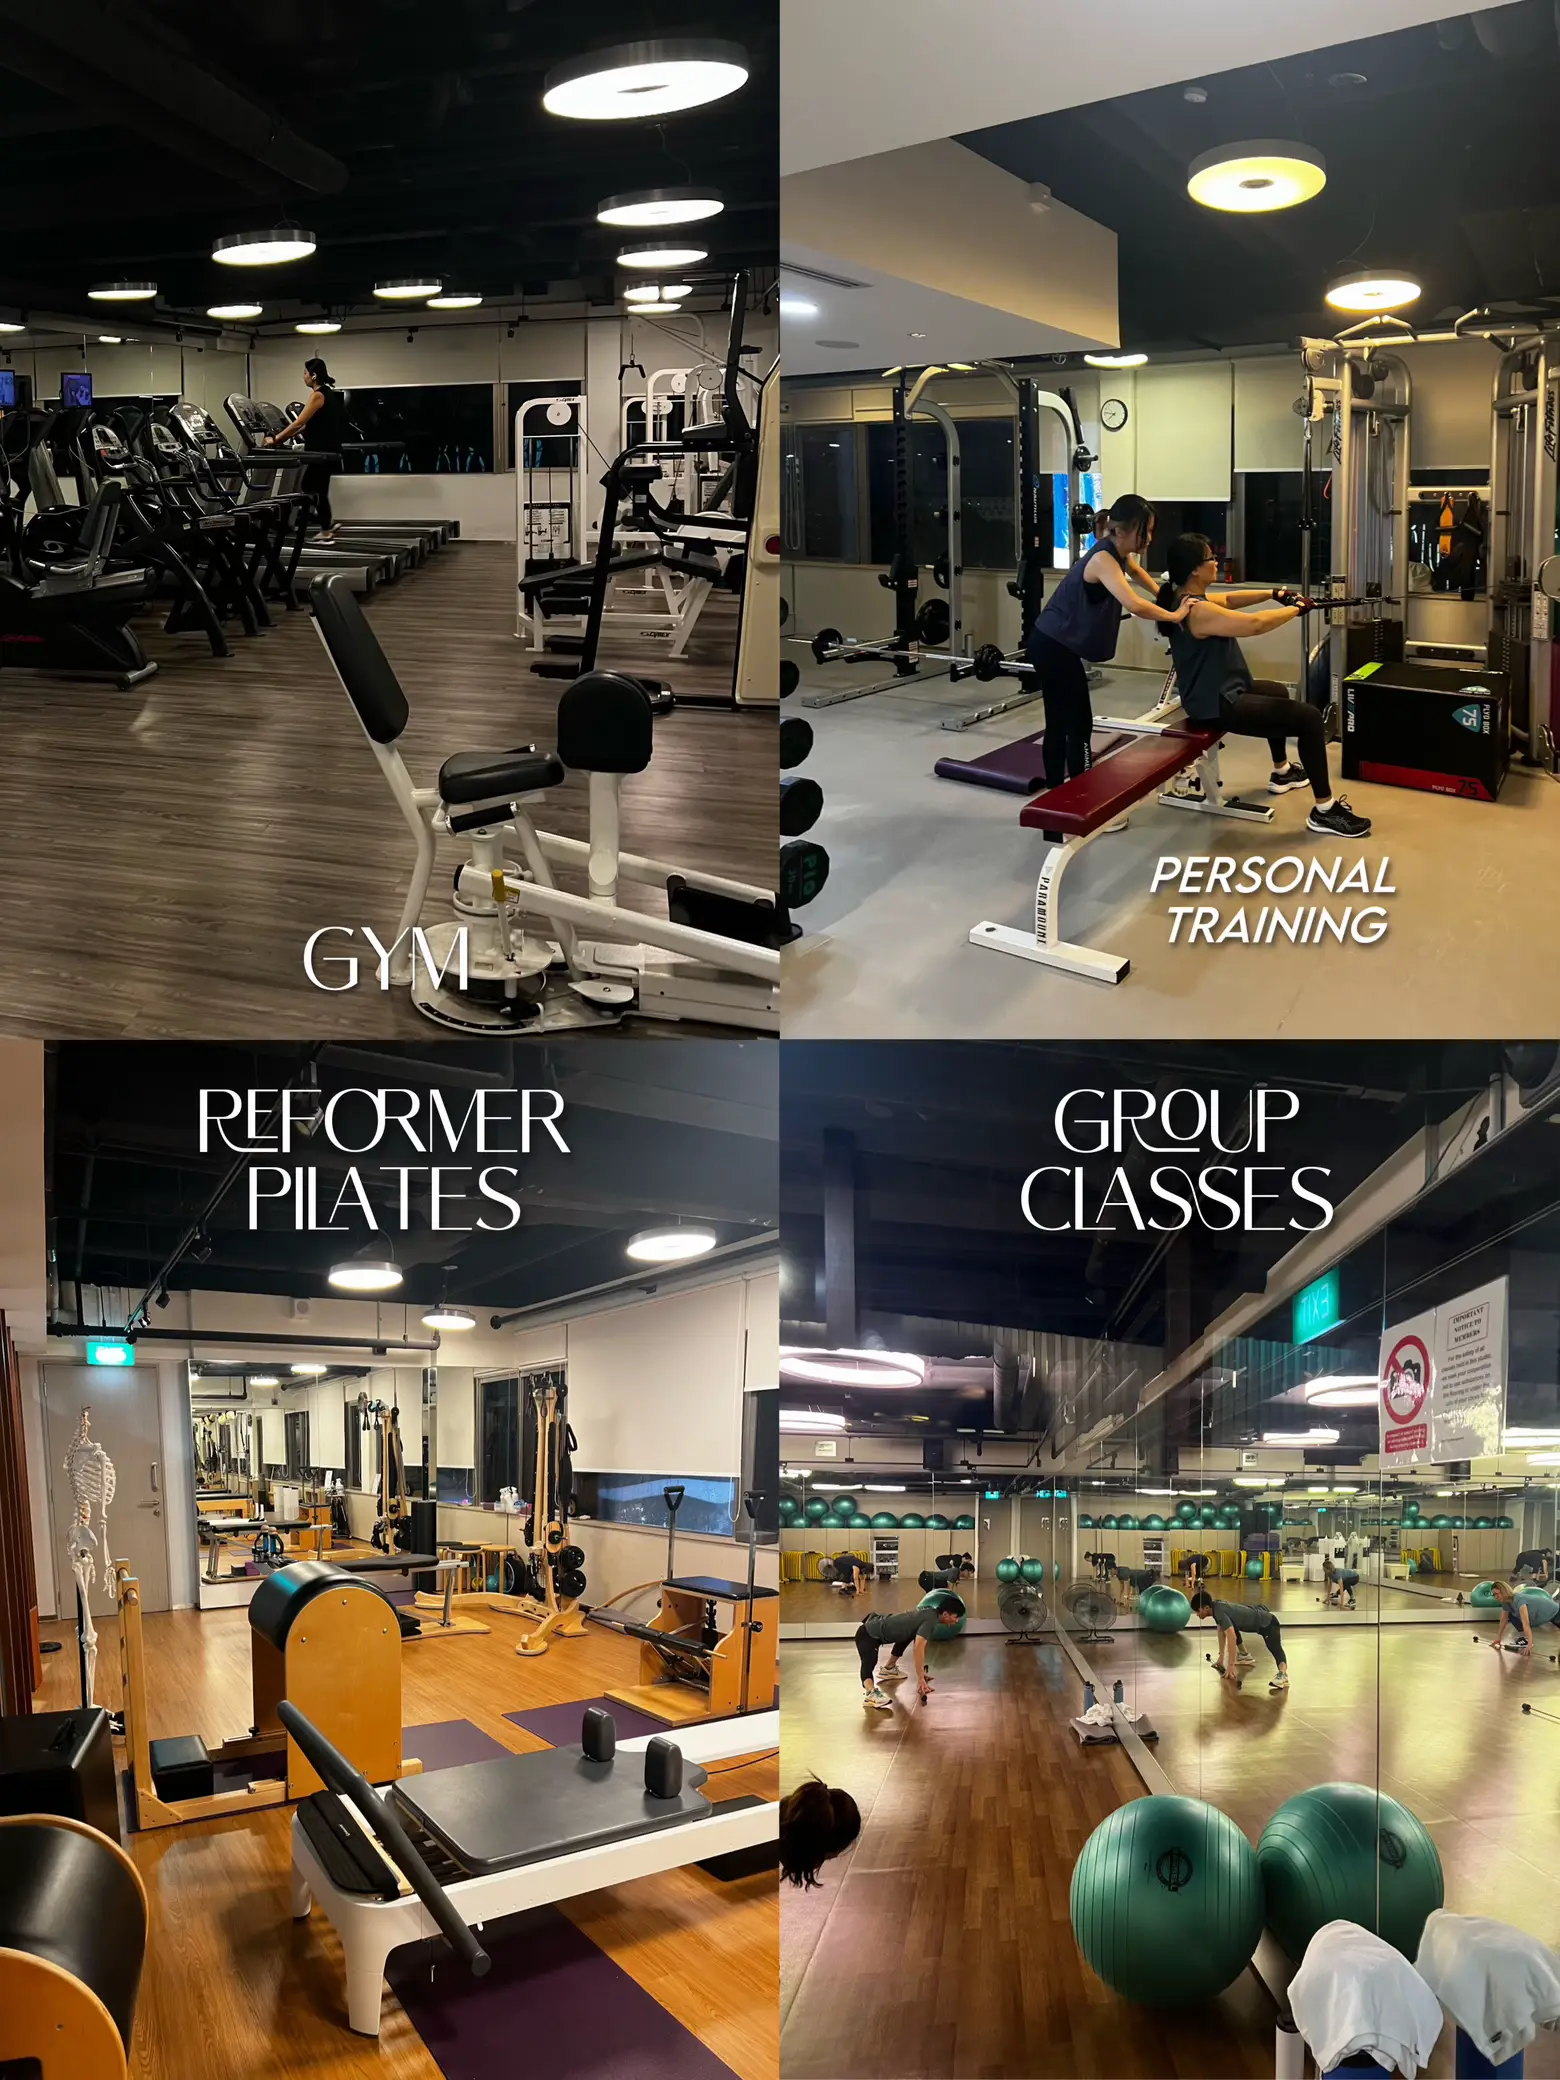 Women-only fitness & spa club, all under one roof!'s images(2)